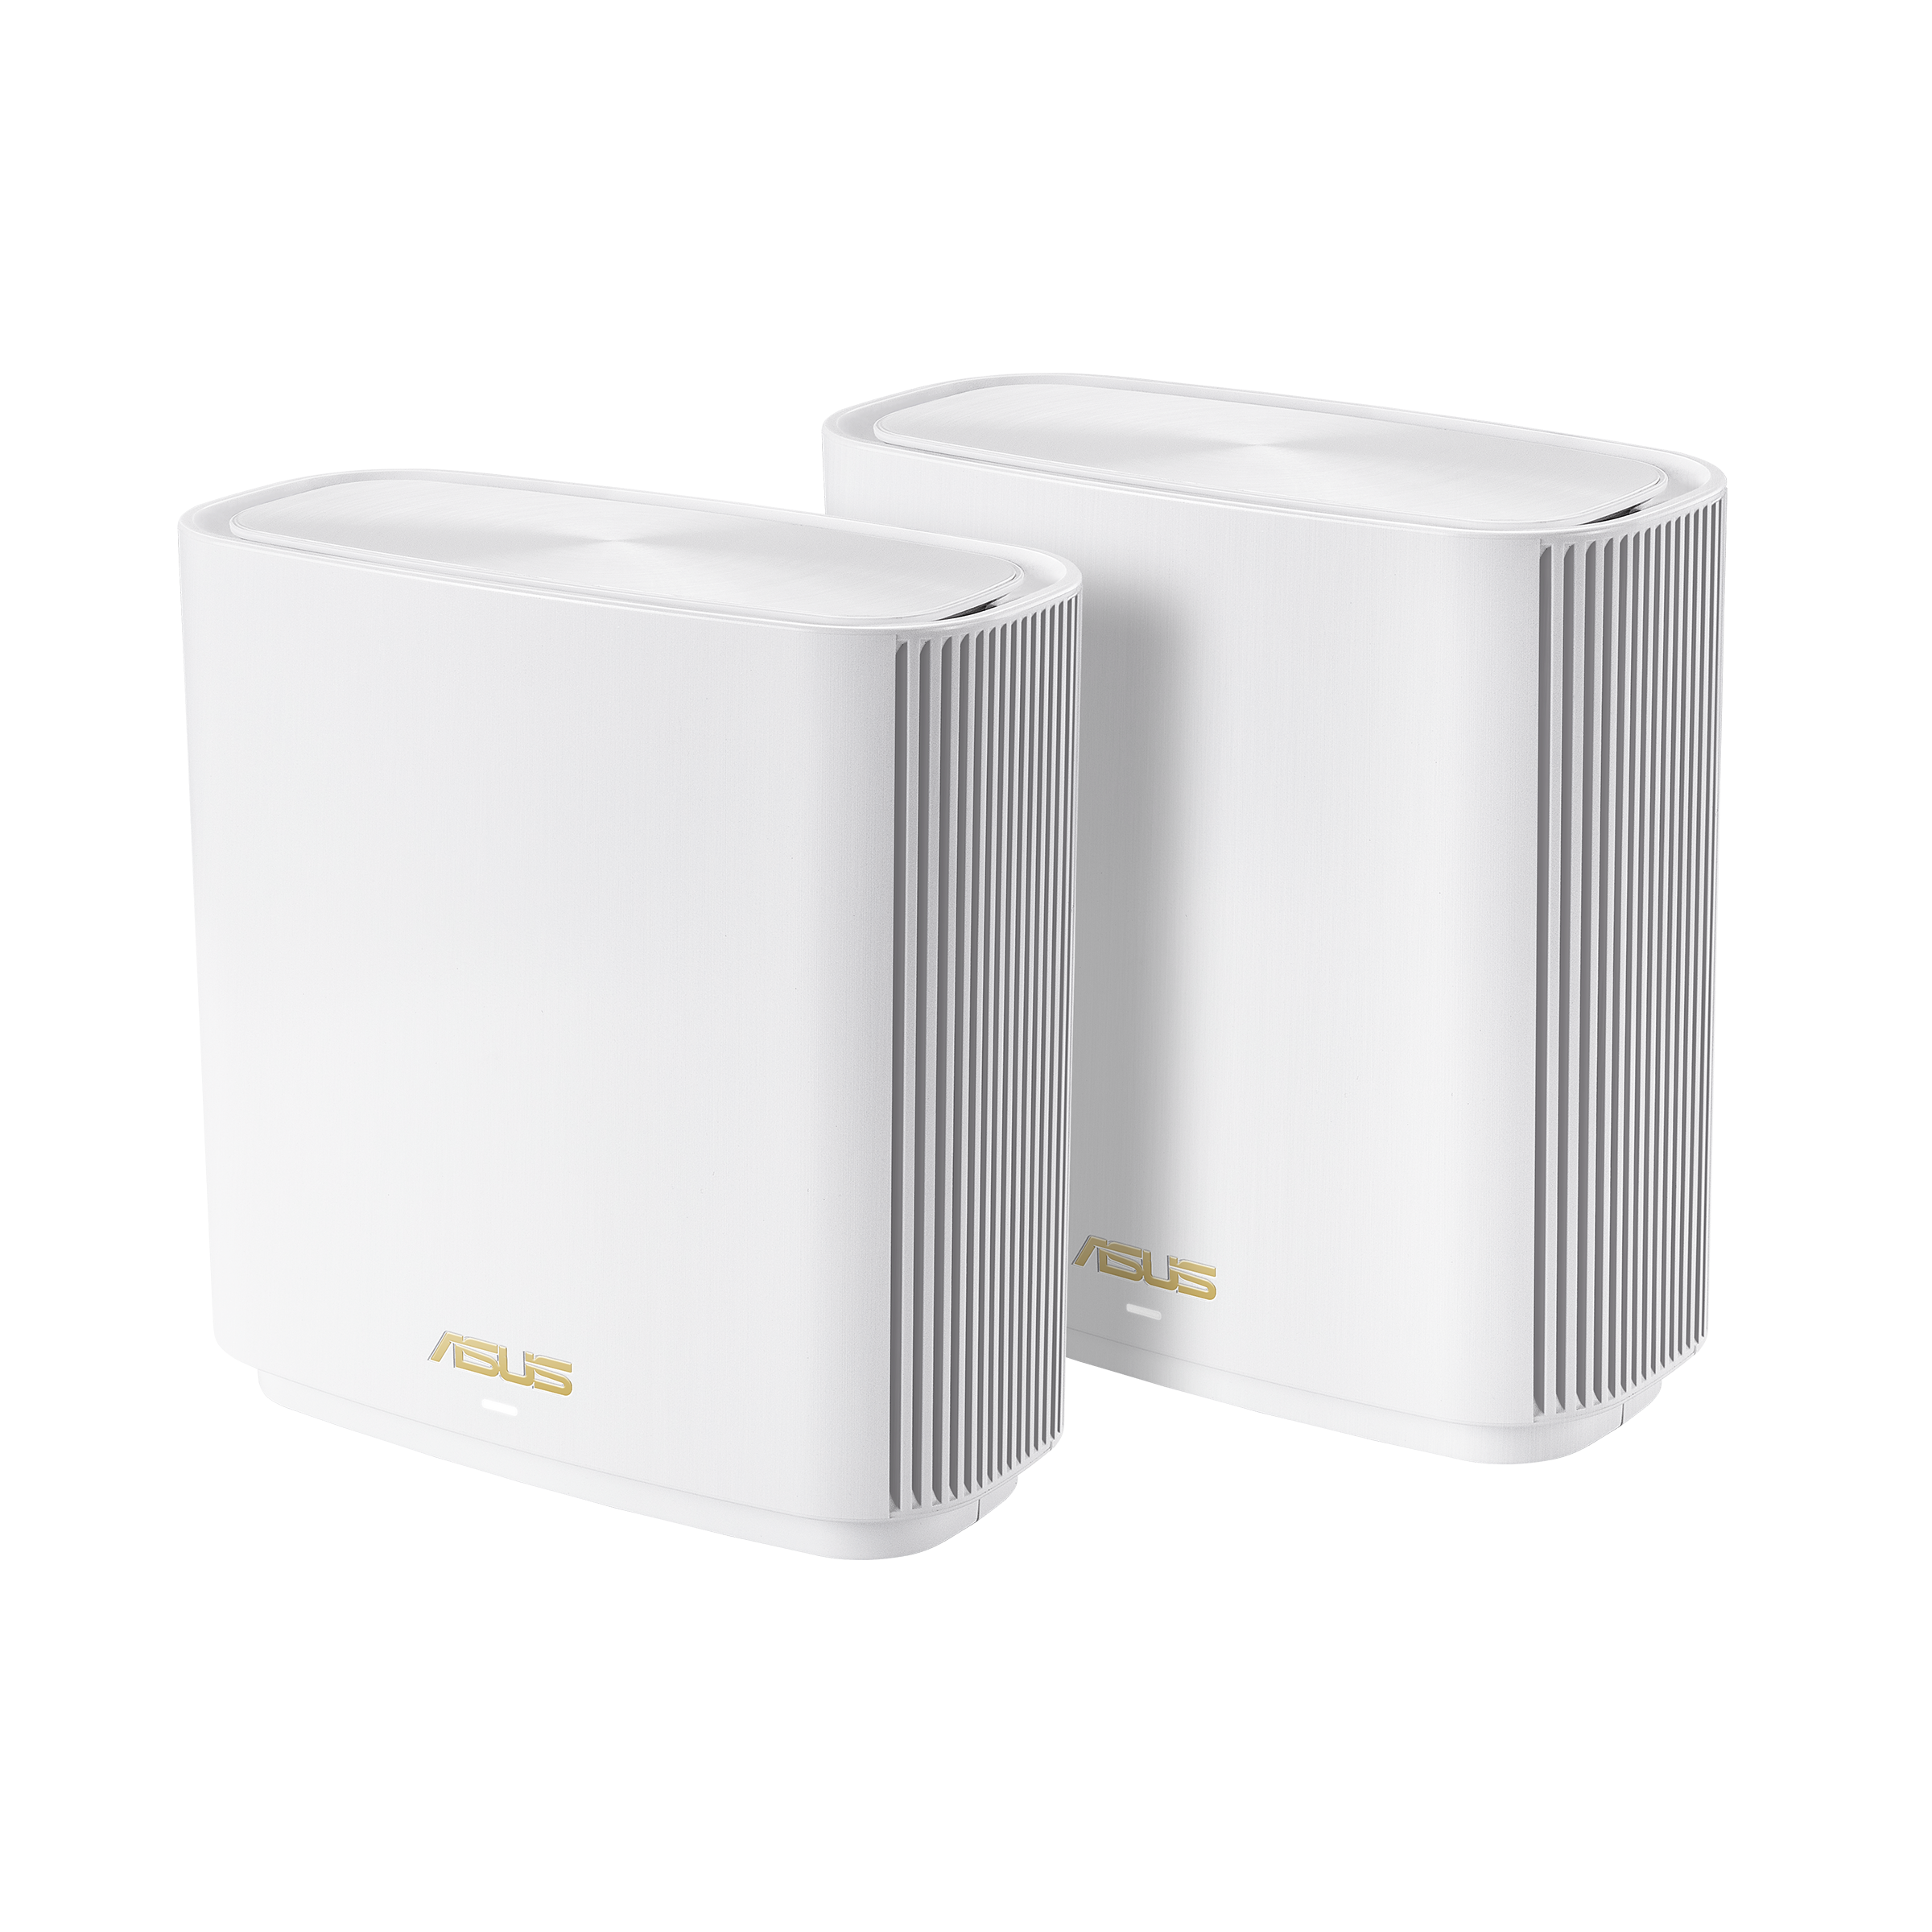 ASUS ZenWiFi ET9｜Whole Home Mesh WiFi System｜ASUS Global